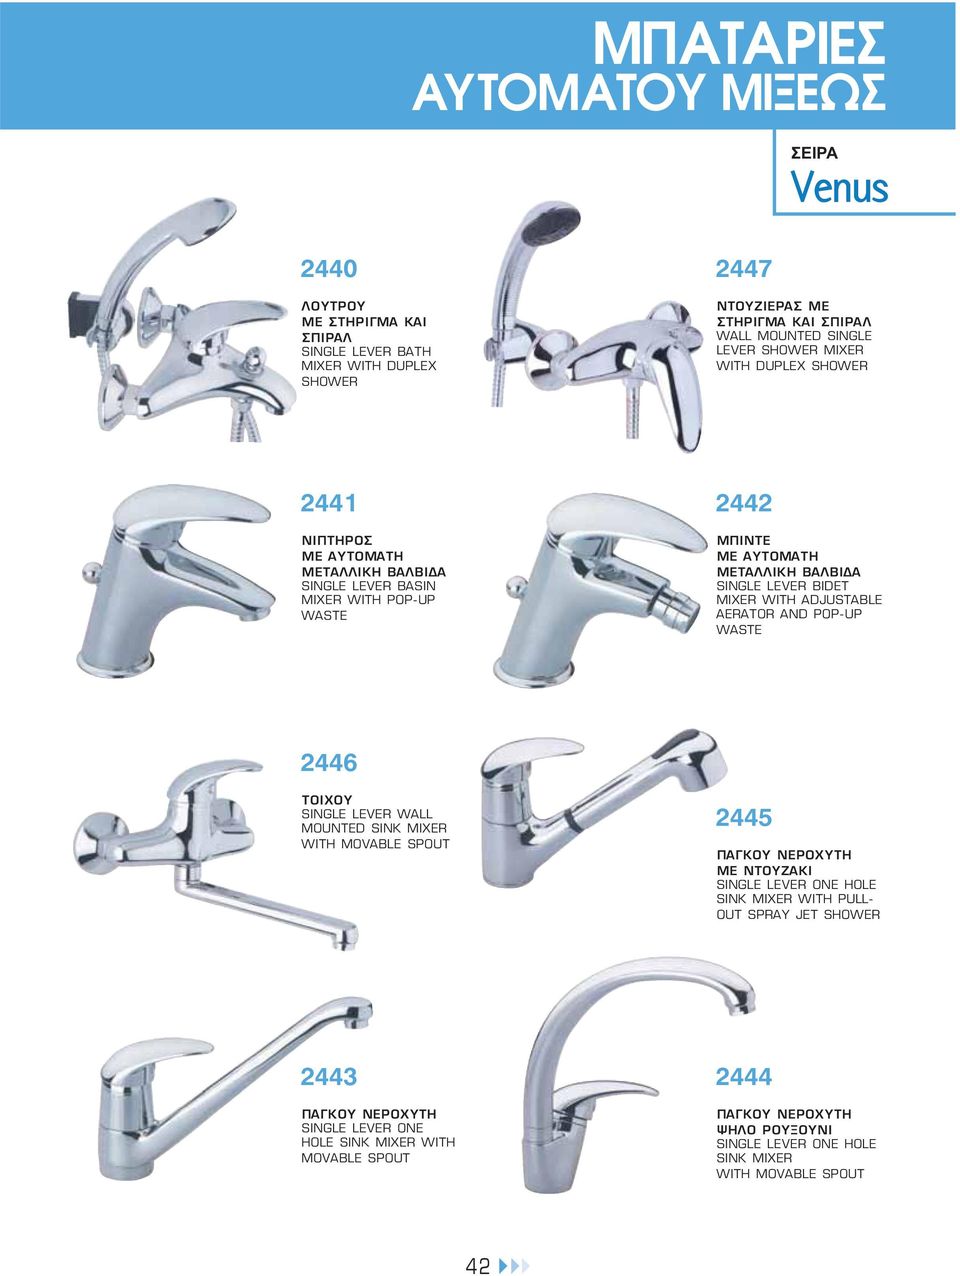 ADJUSTABLE AERATOR AND POP-UP 2446 ΤΟΙΧΟΥ SINGLE LEVER WALL MOUNTED SINK MIXER WITH MOVABLE SPOUT 2445 ΜΕ ΝΤΟΥΖΑΚΙ SINGLE LEVER ONE HOLE SINK MIXER WITH